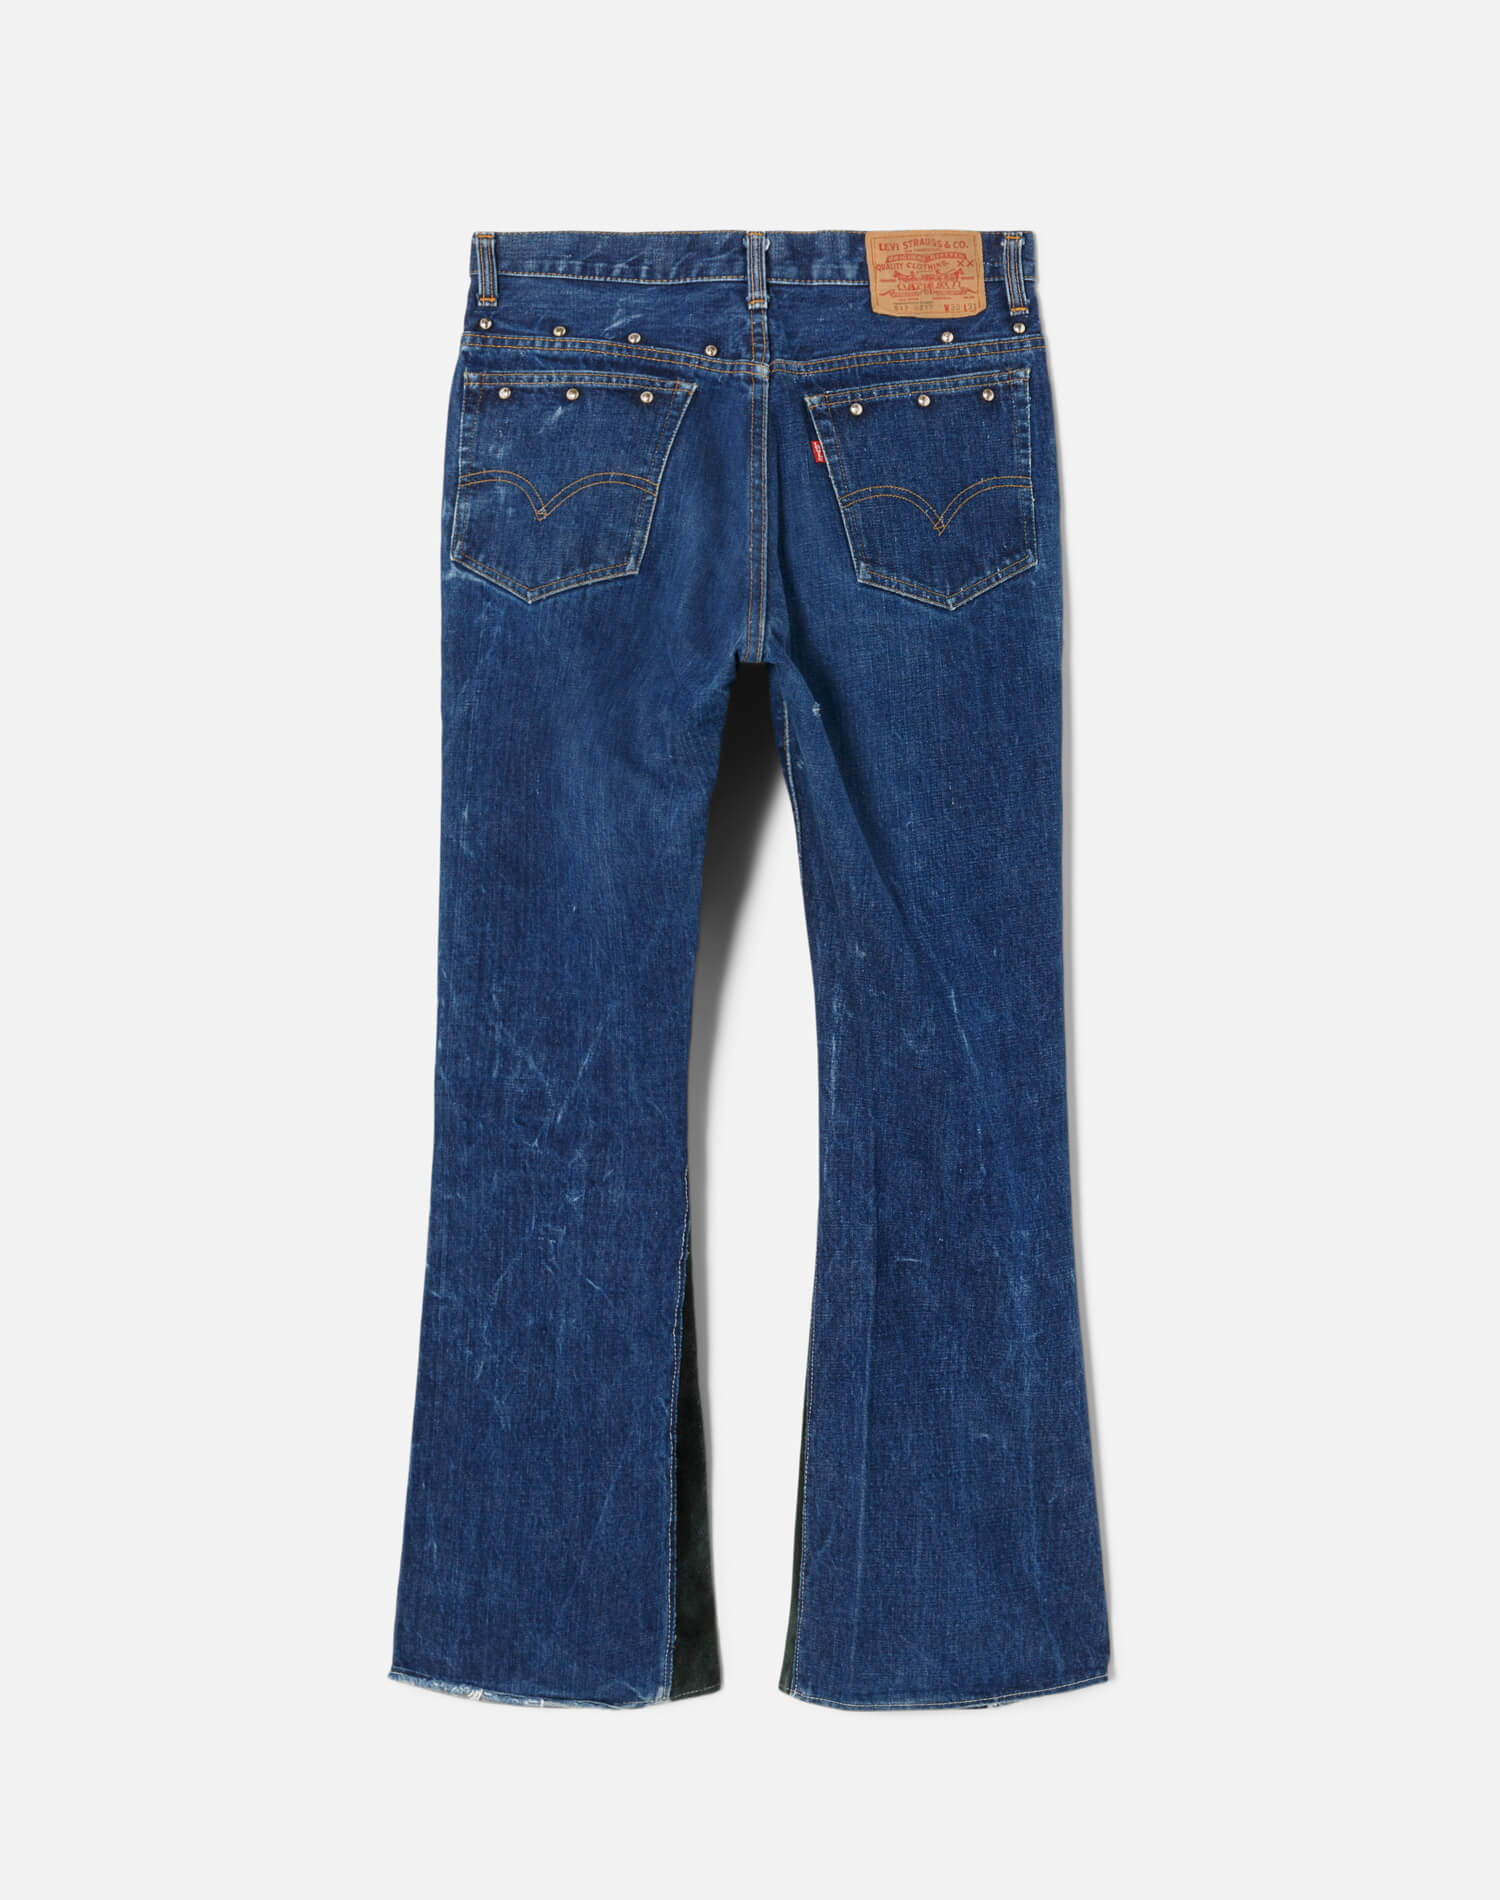 70s Levi's studded flares